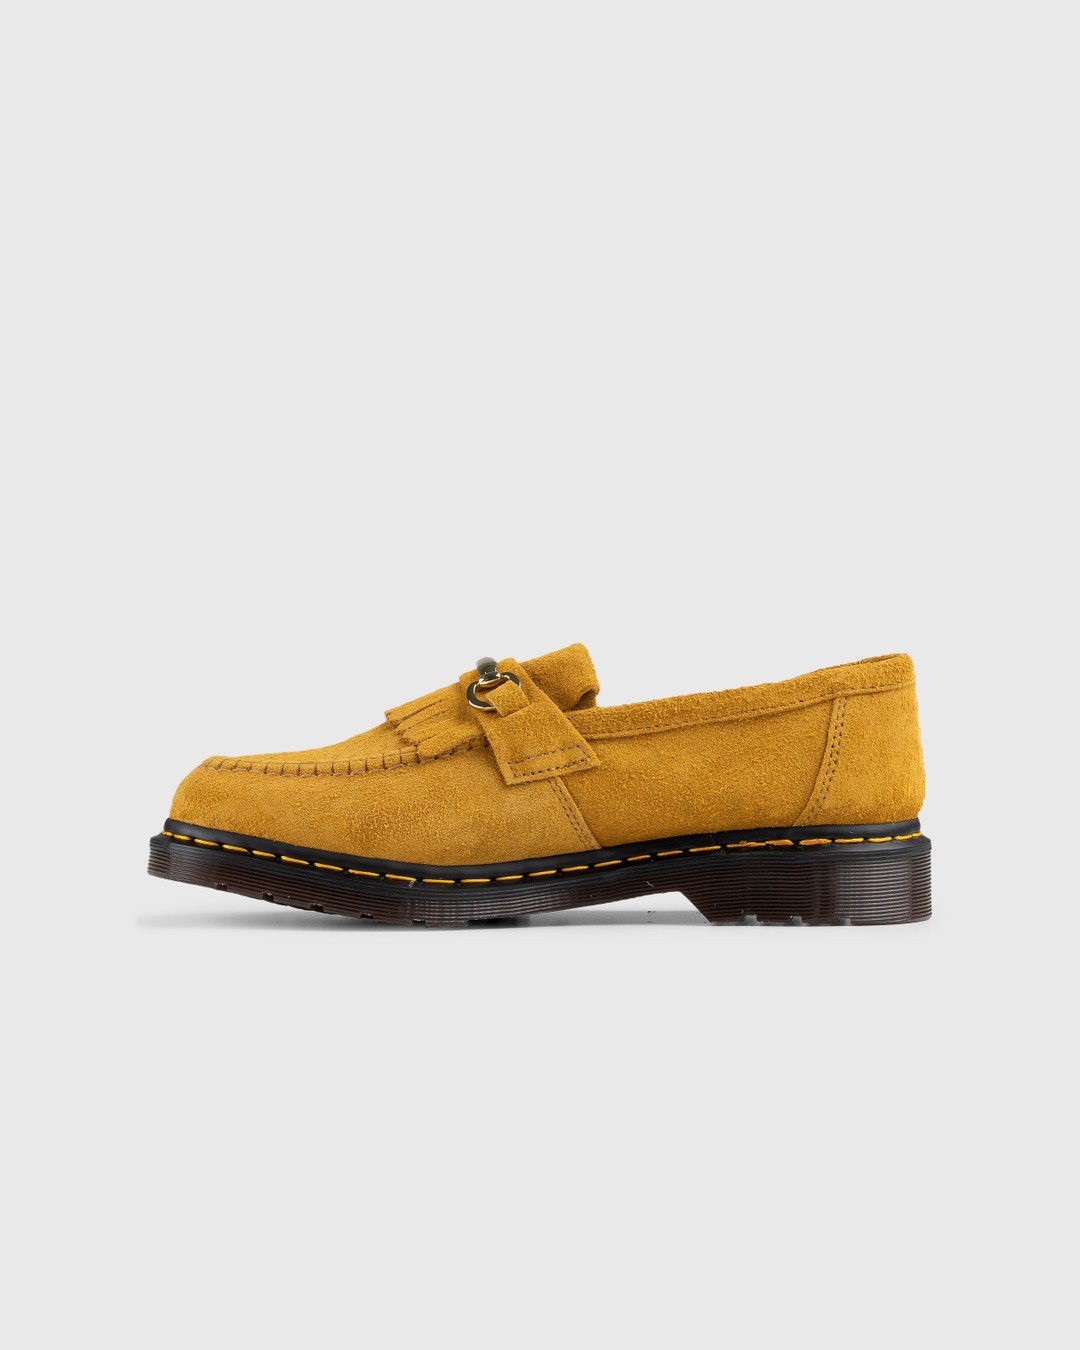 Dr. Martens – Adrian Snaffle Suede Loafers Light Tan Desert Oasis Suede (Gum Oil) - Shoes - Brown - Image 2